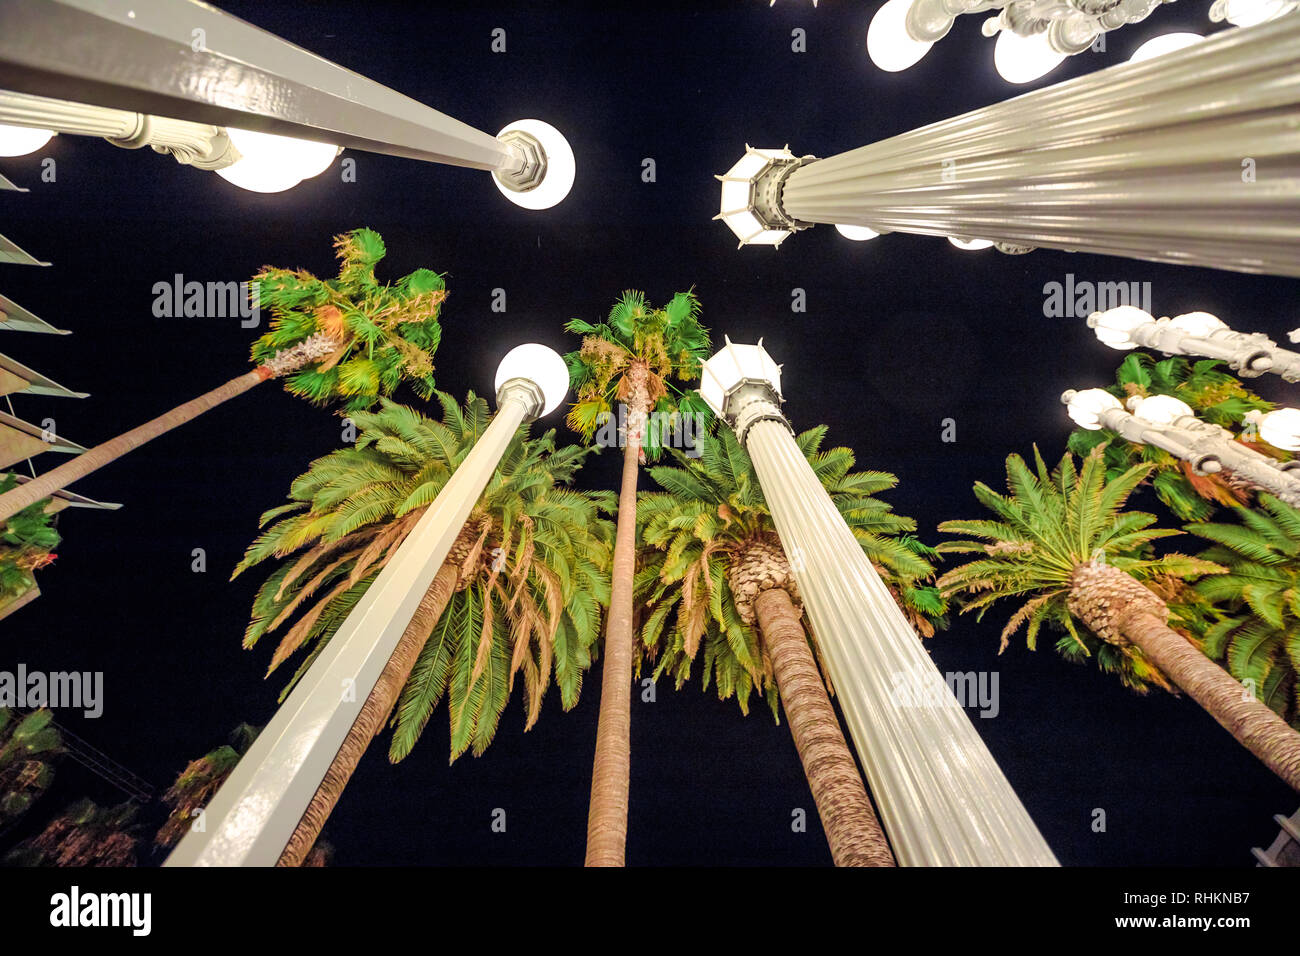 Bottom view of street lamps and plam trees in the night sky. Famous landmark, LACMA, Los Angeles, California, United States. Night urban scene. Stock Photo